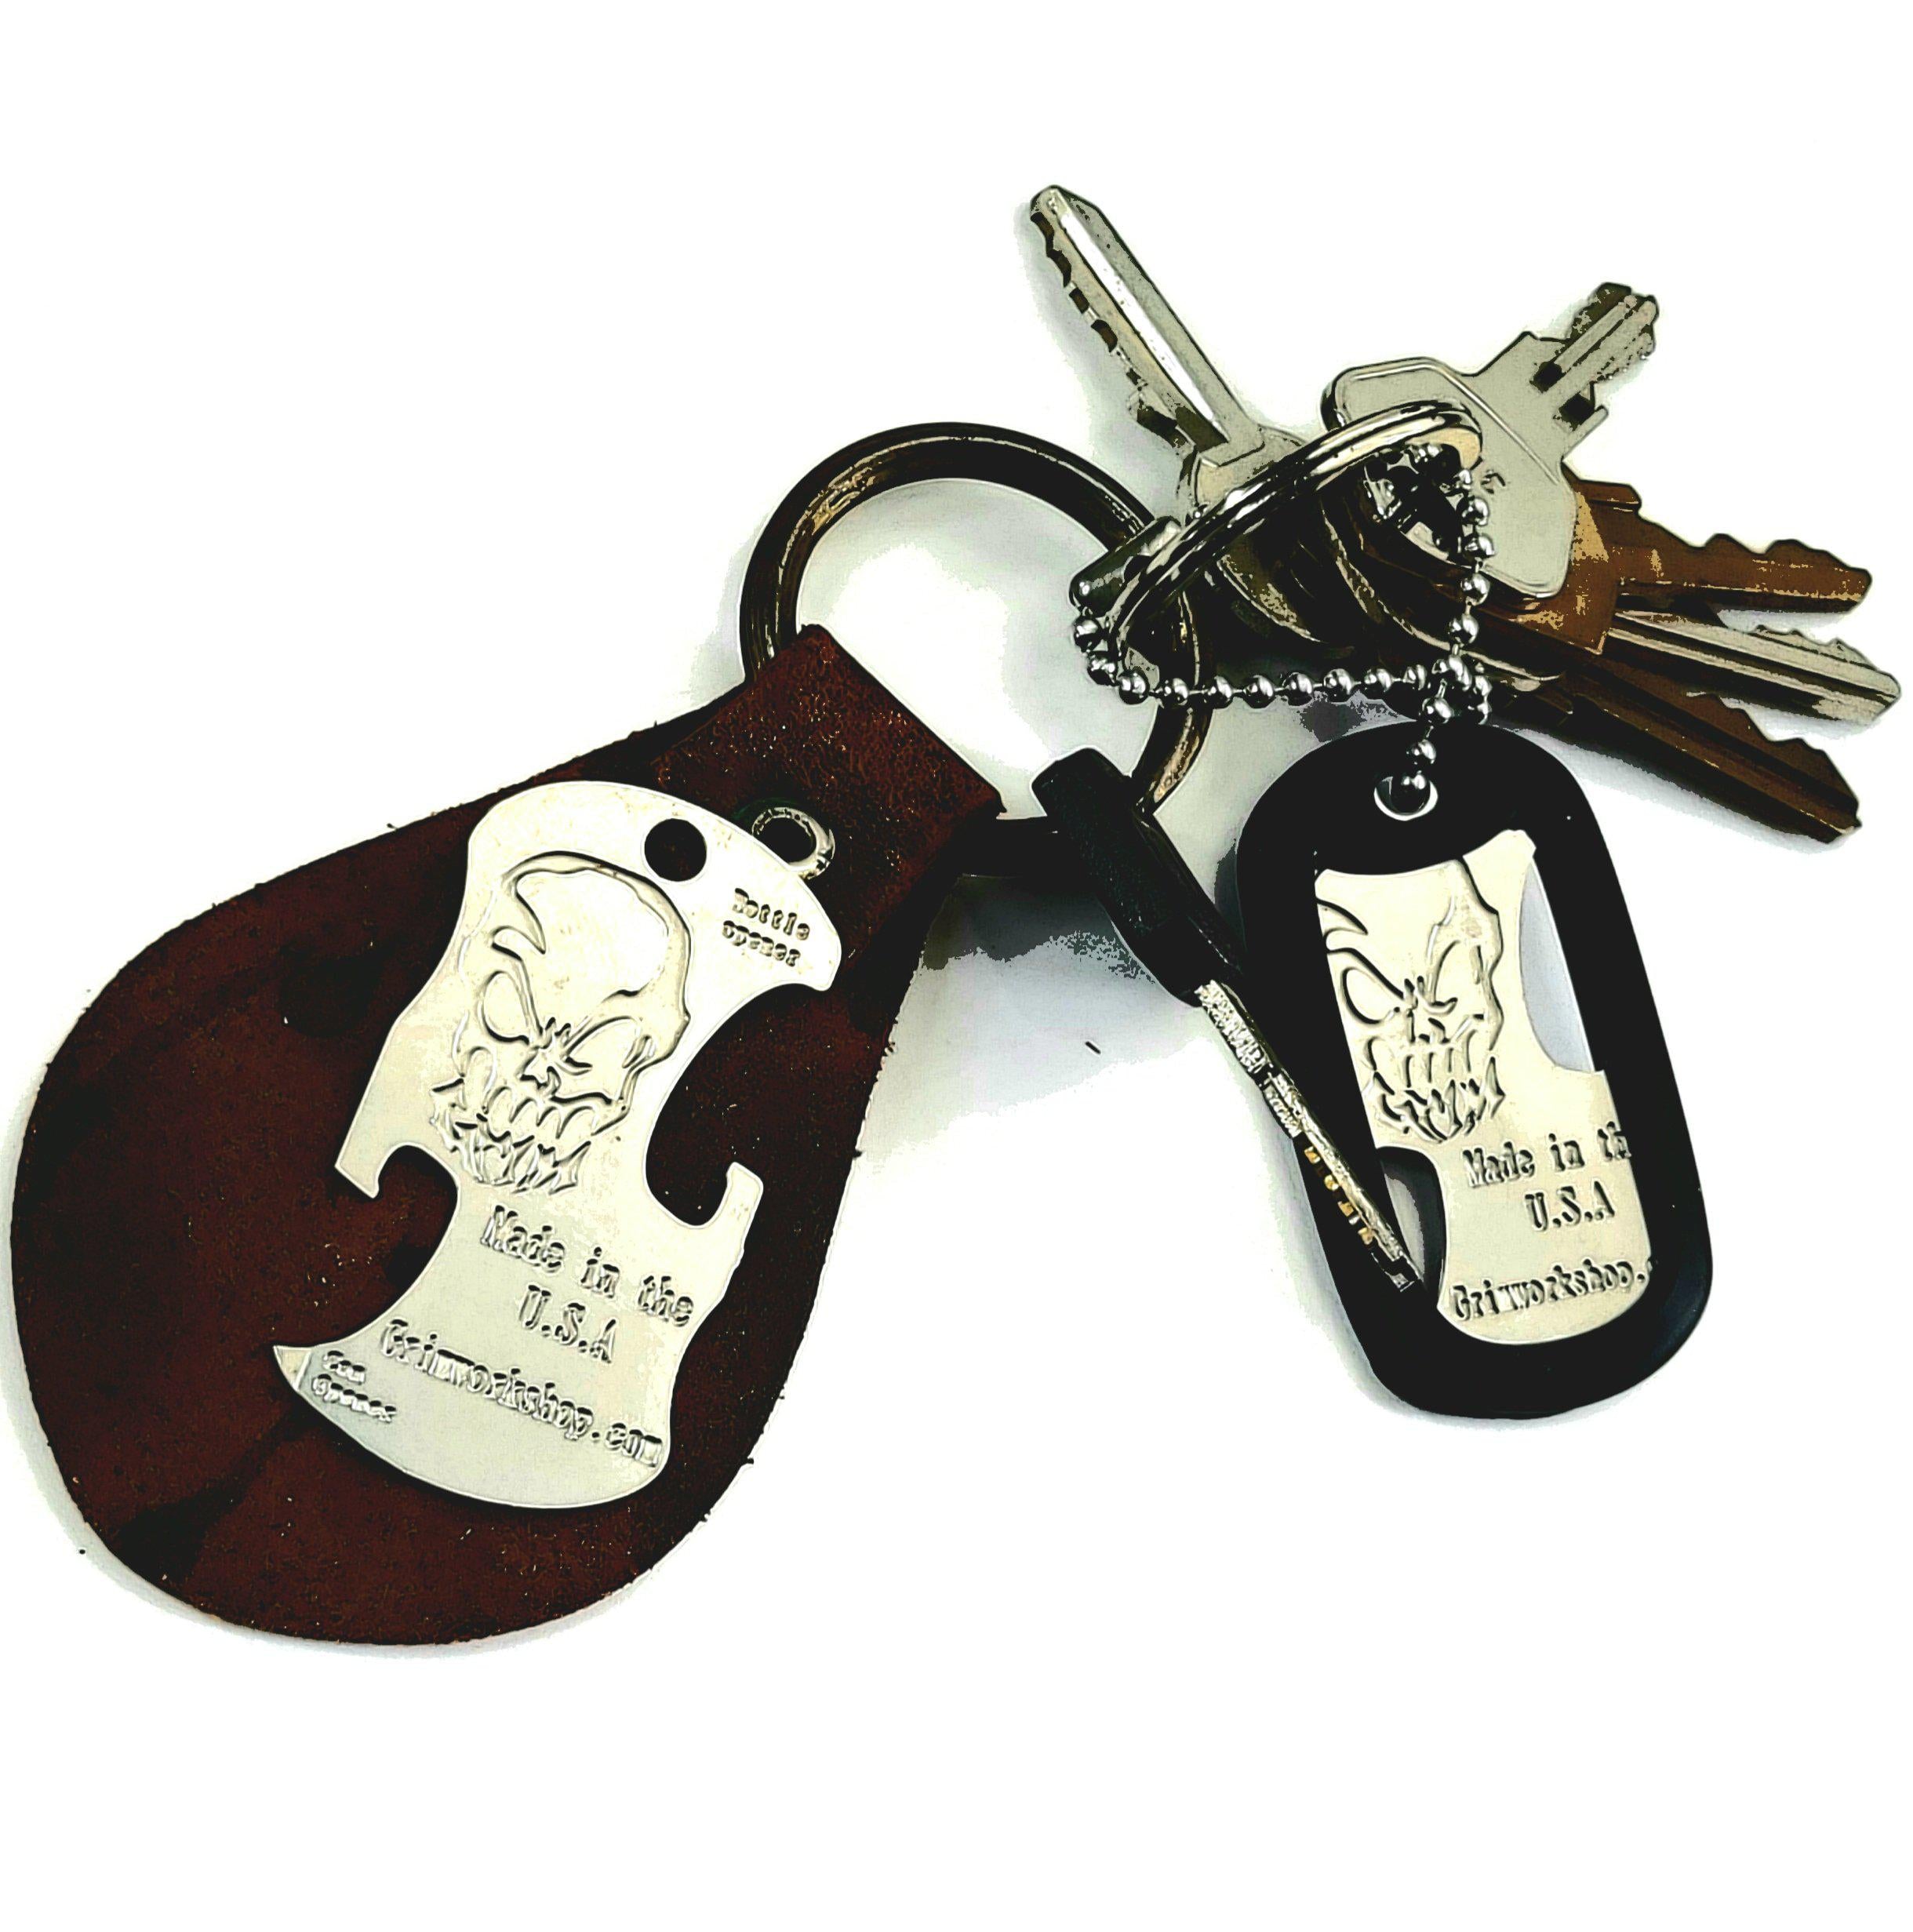 dog tag bottle opener necklace. This can opener bottle opener combo for everyday carry or mess kits!